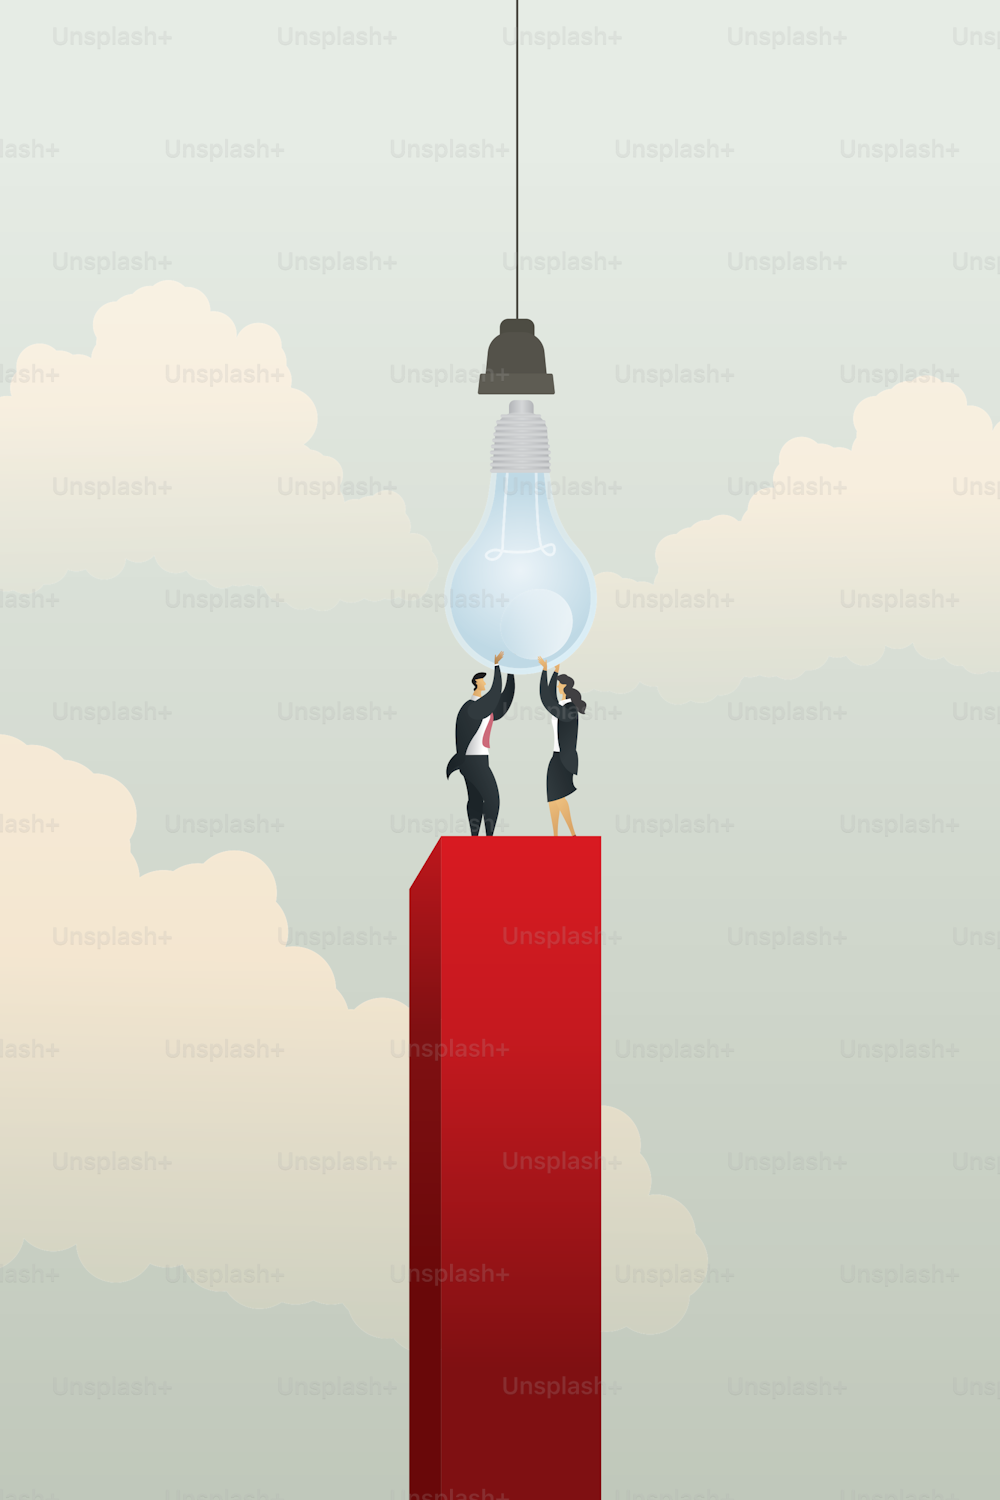 Businessmen and businesswomen help hold the light bulb on red graph, creative business ideas brainstorming or teamwork concept on sky background. illustration vector Eps10